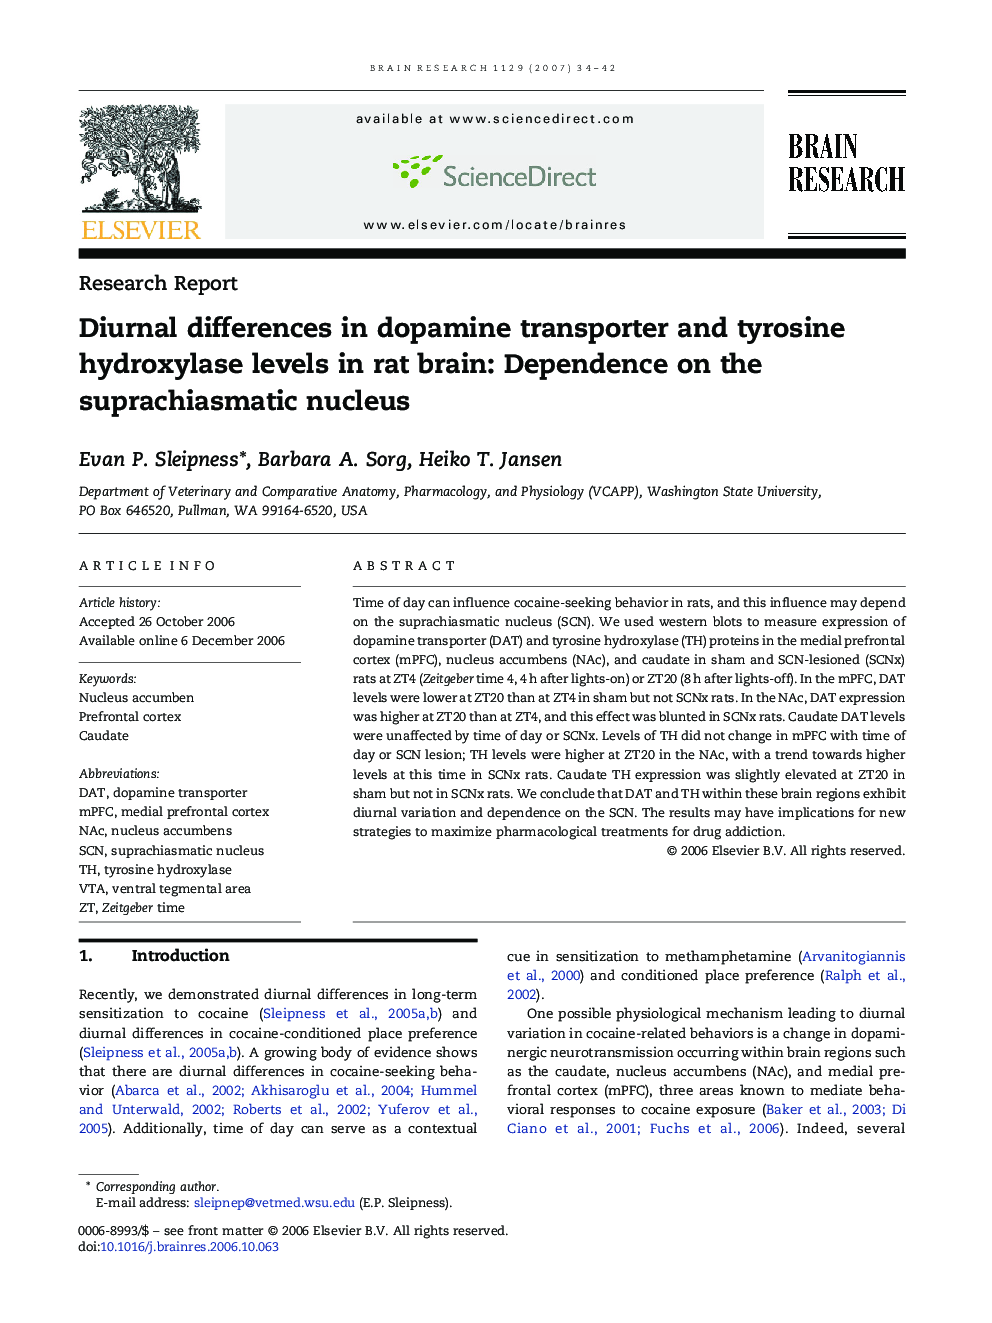 Diurnal differences in dopamine transporter and tyrosine hydroxylase levels in rat brain: Dependence on the suprachiasmatic nucleus